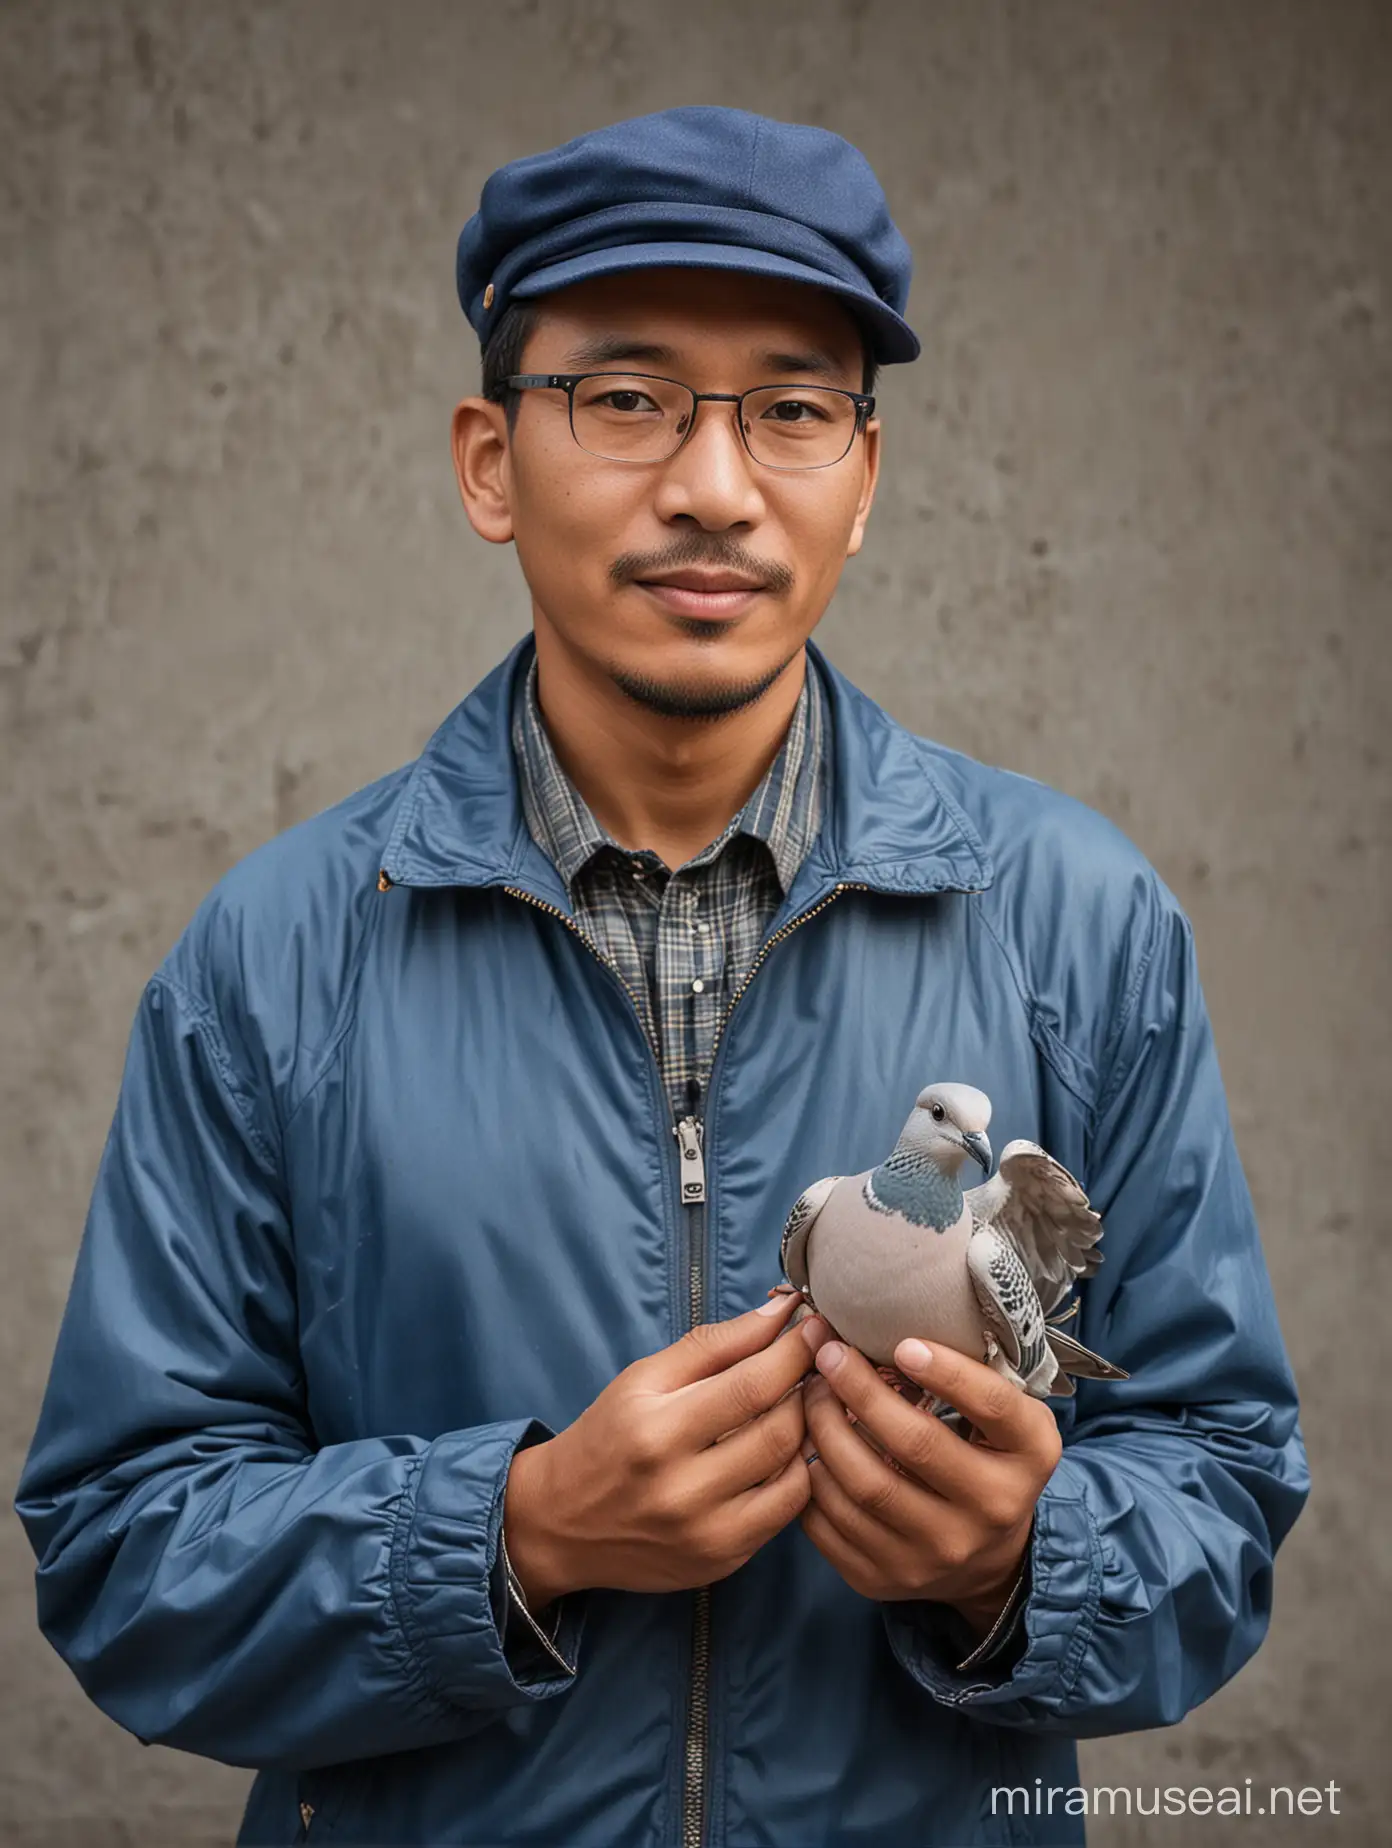 A Indonesia man in a blue jacket and hat is holding a bird of turtledove.